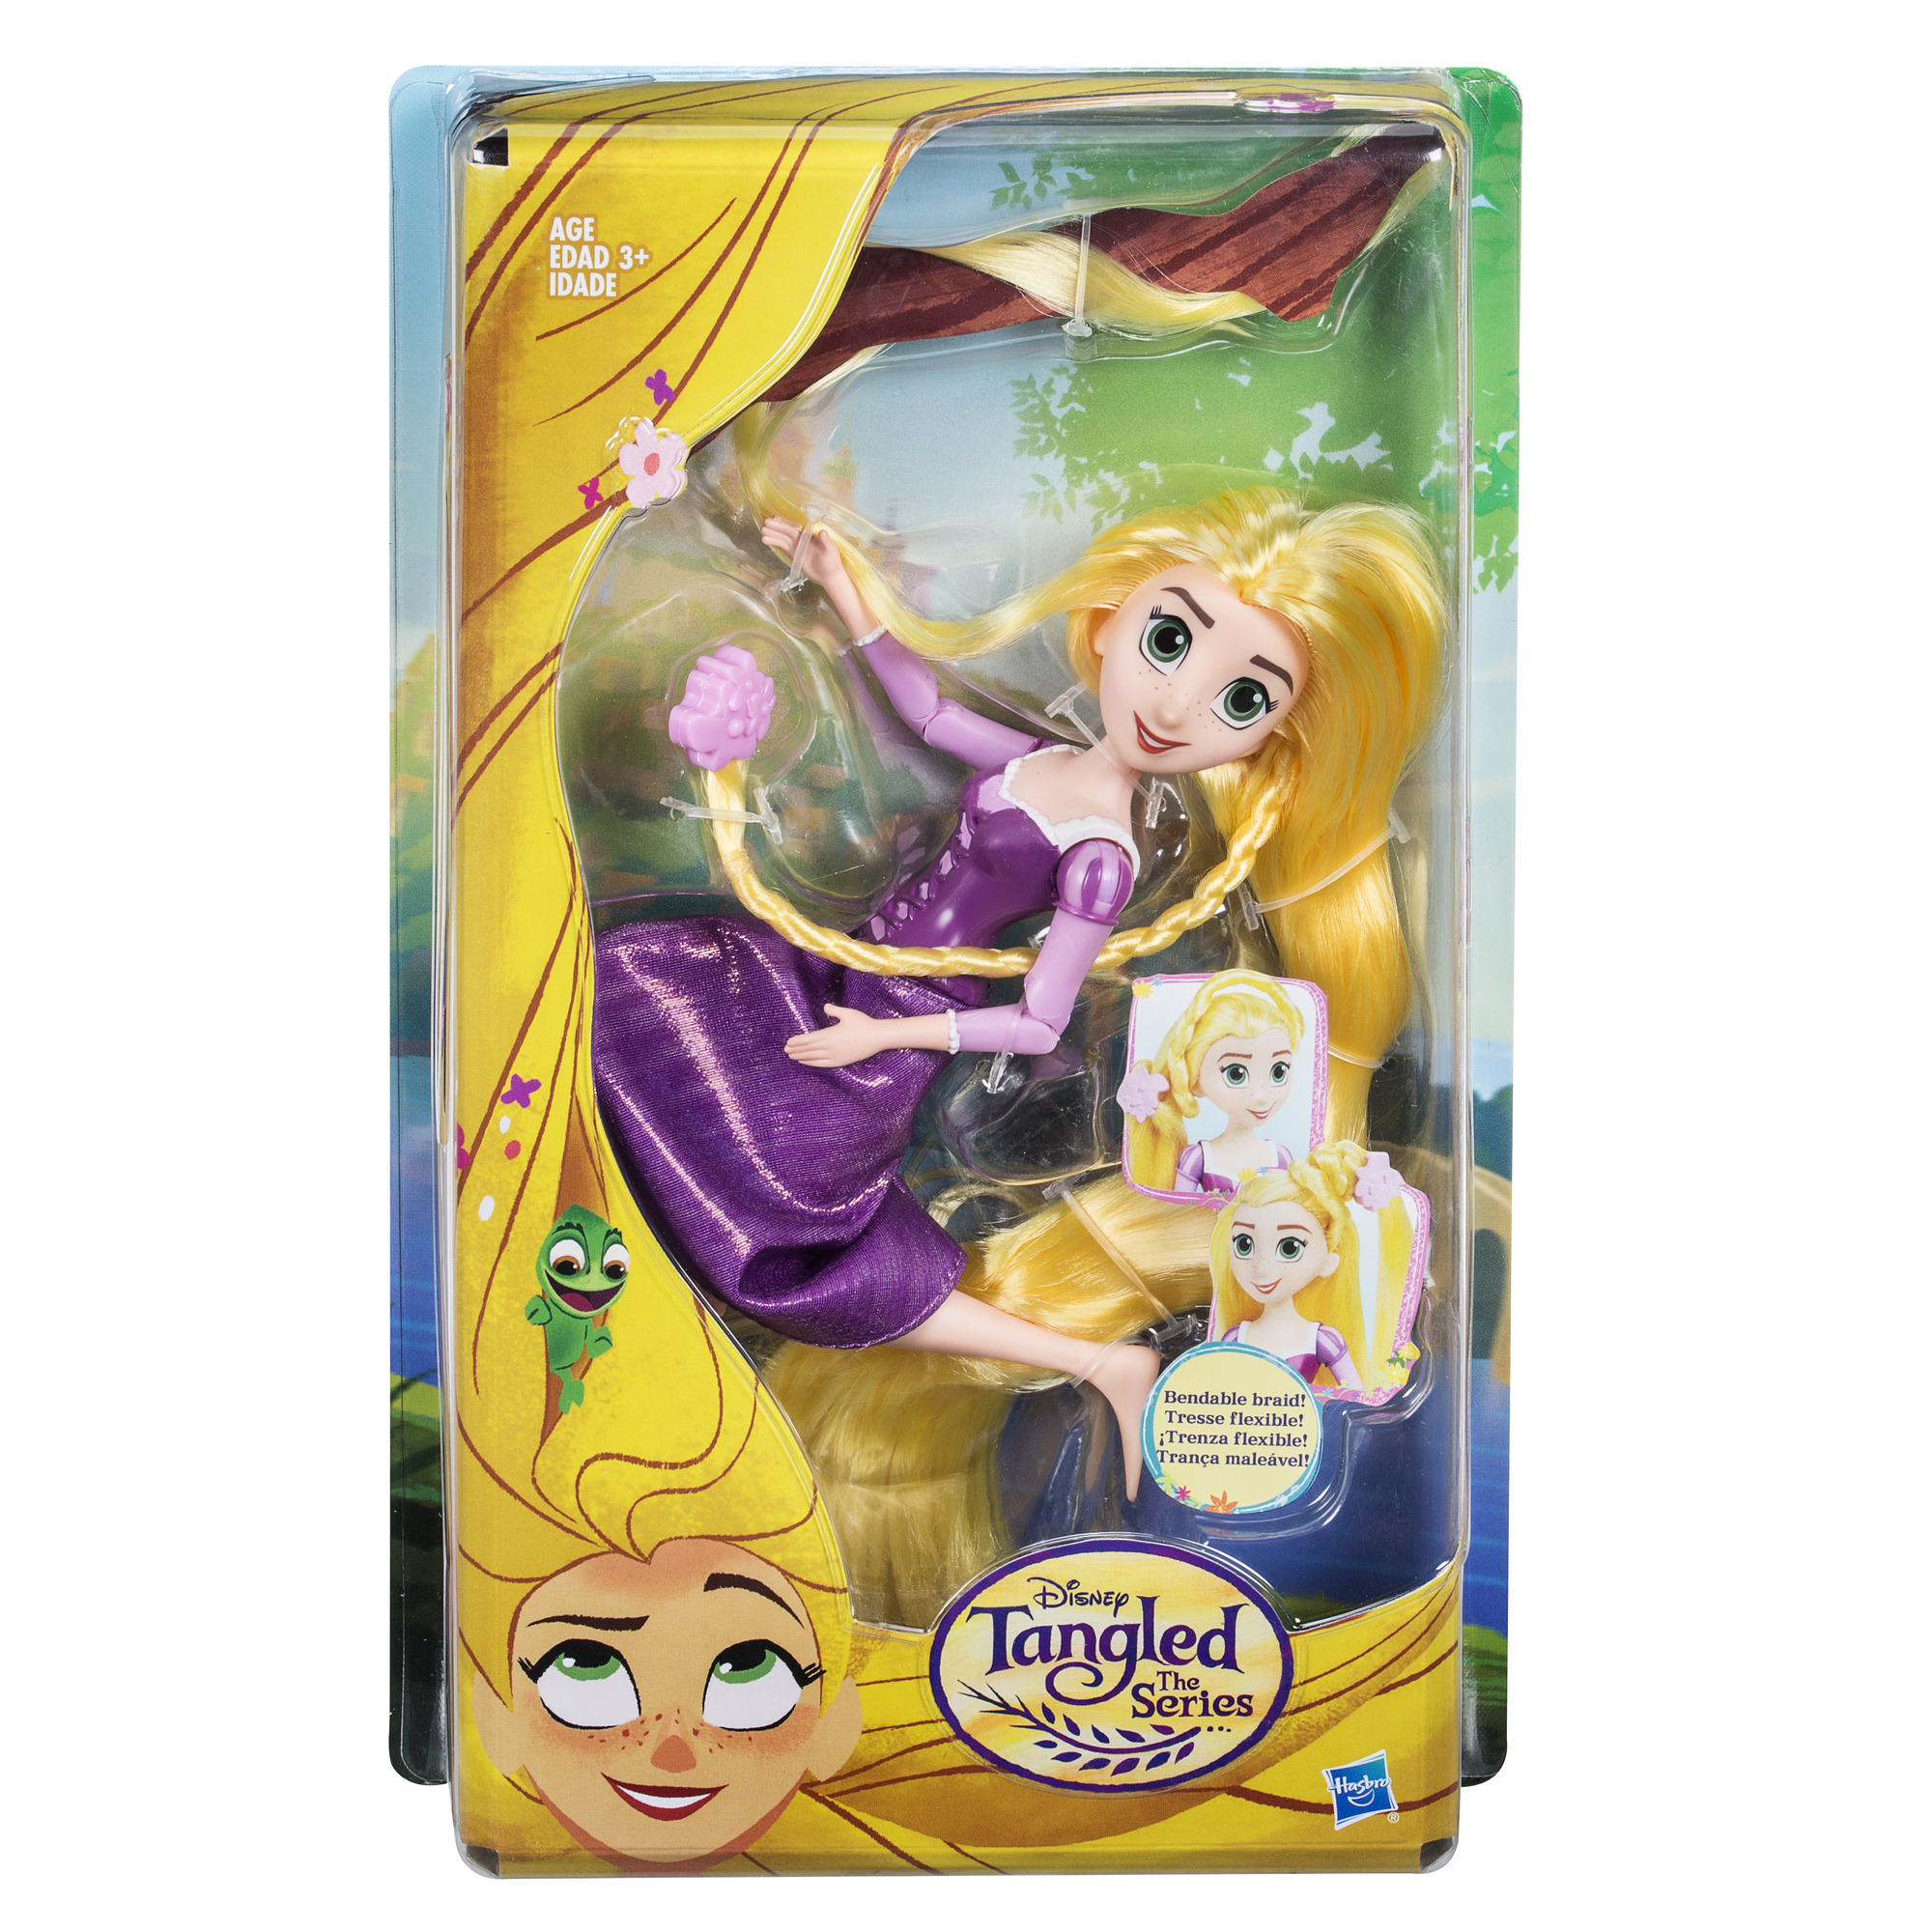 Disney Tangled the Series Rapunzel, ages 3 & up - image 3 of 9